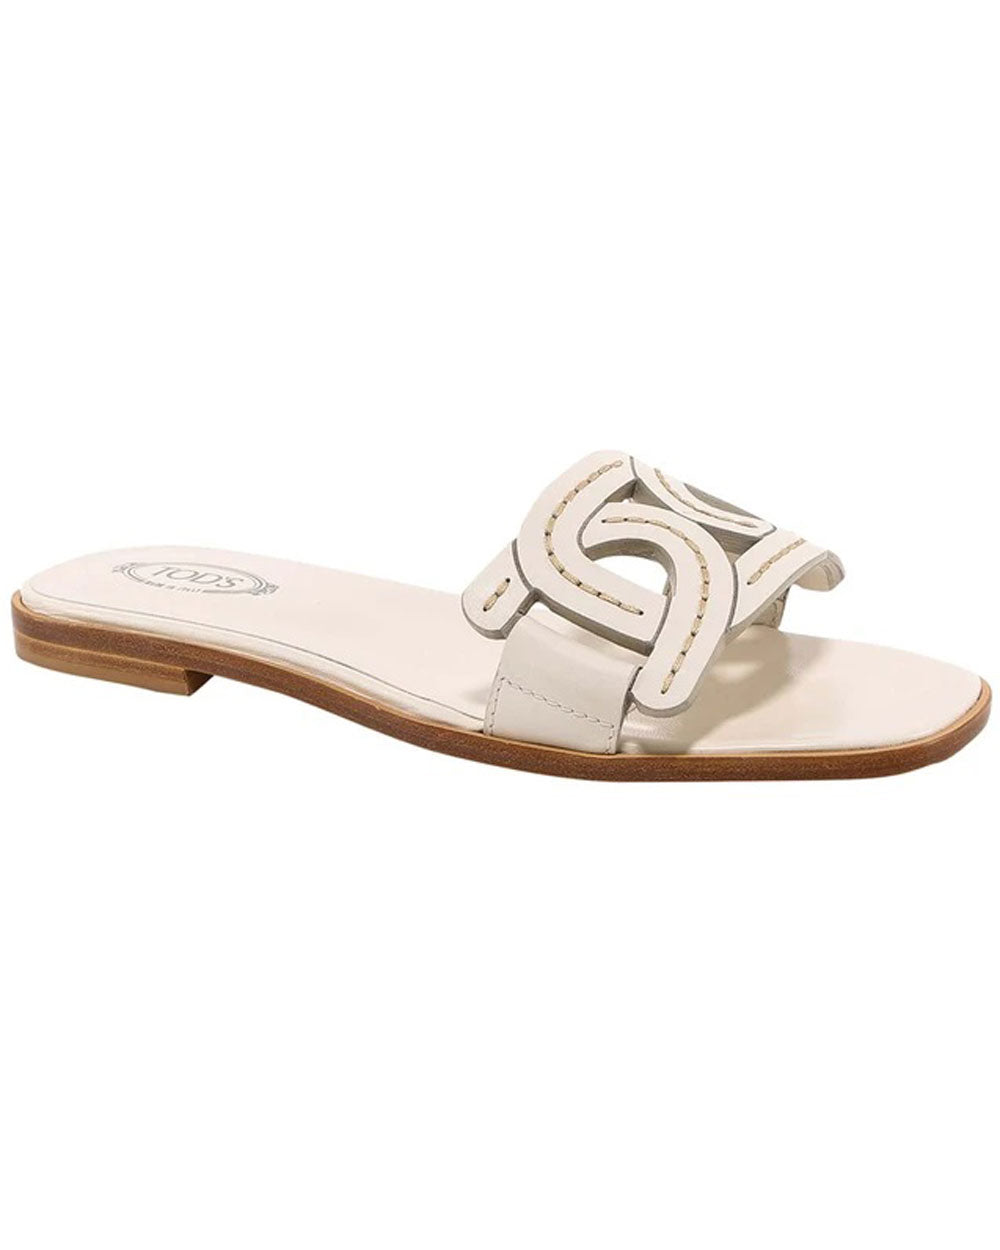 Woven Effect Leather Sandal in White